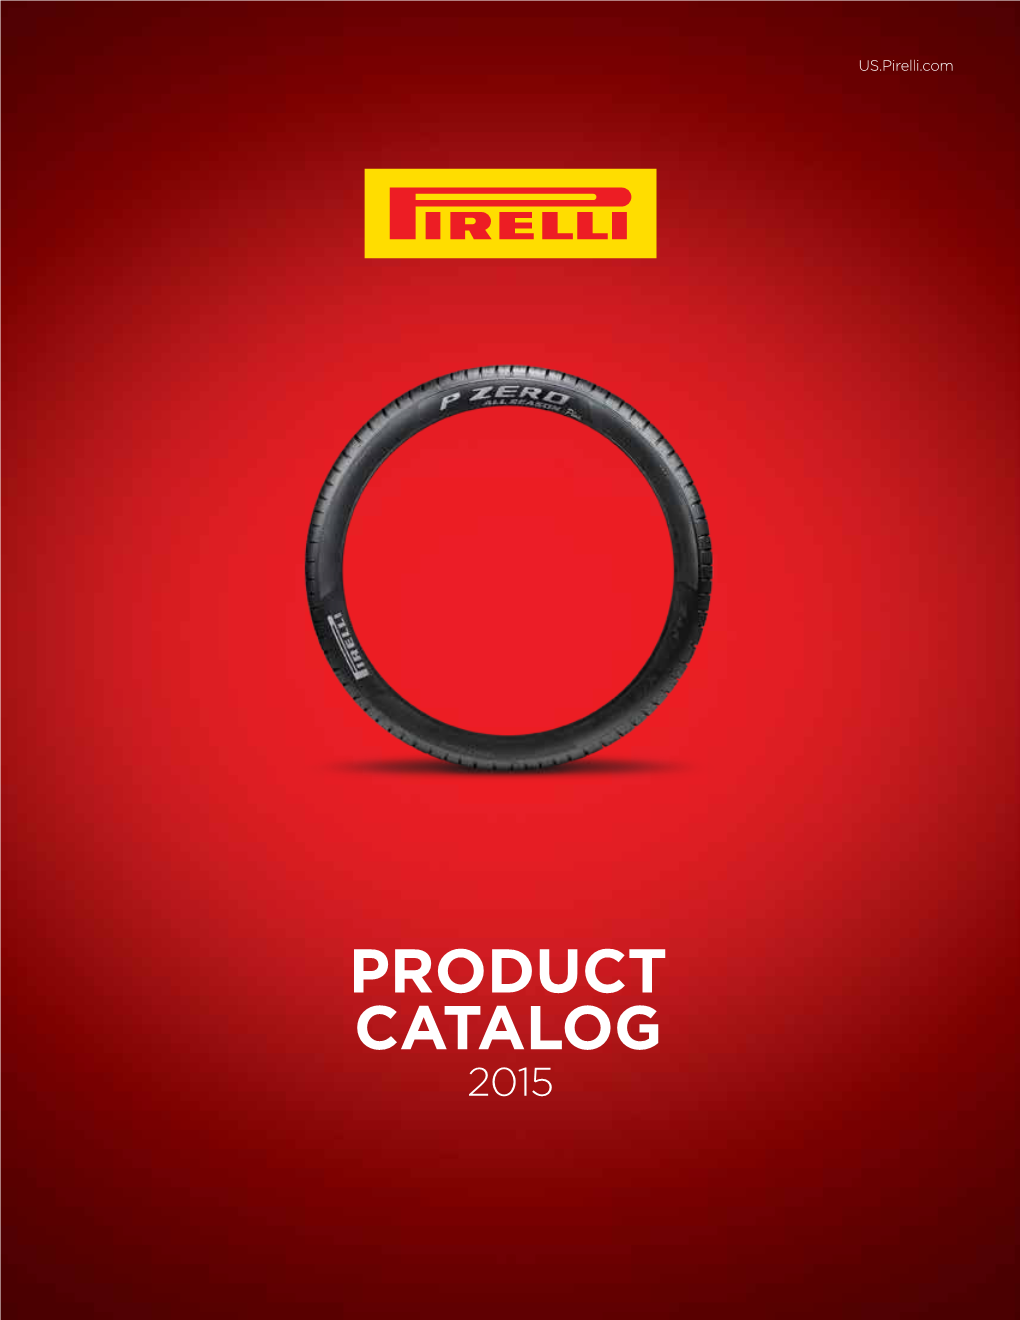 PRODUCT CATALOG 2015 PERFORMANCE YOU CAN TRUST Introducing the NEW Pirelli Confidence Plan